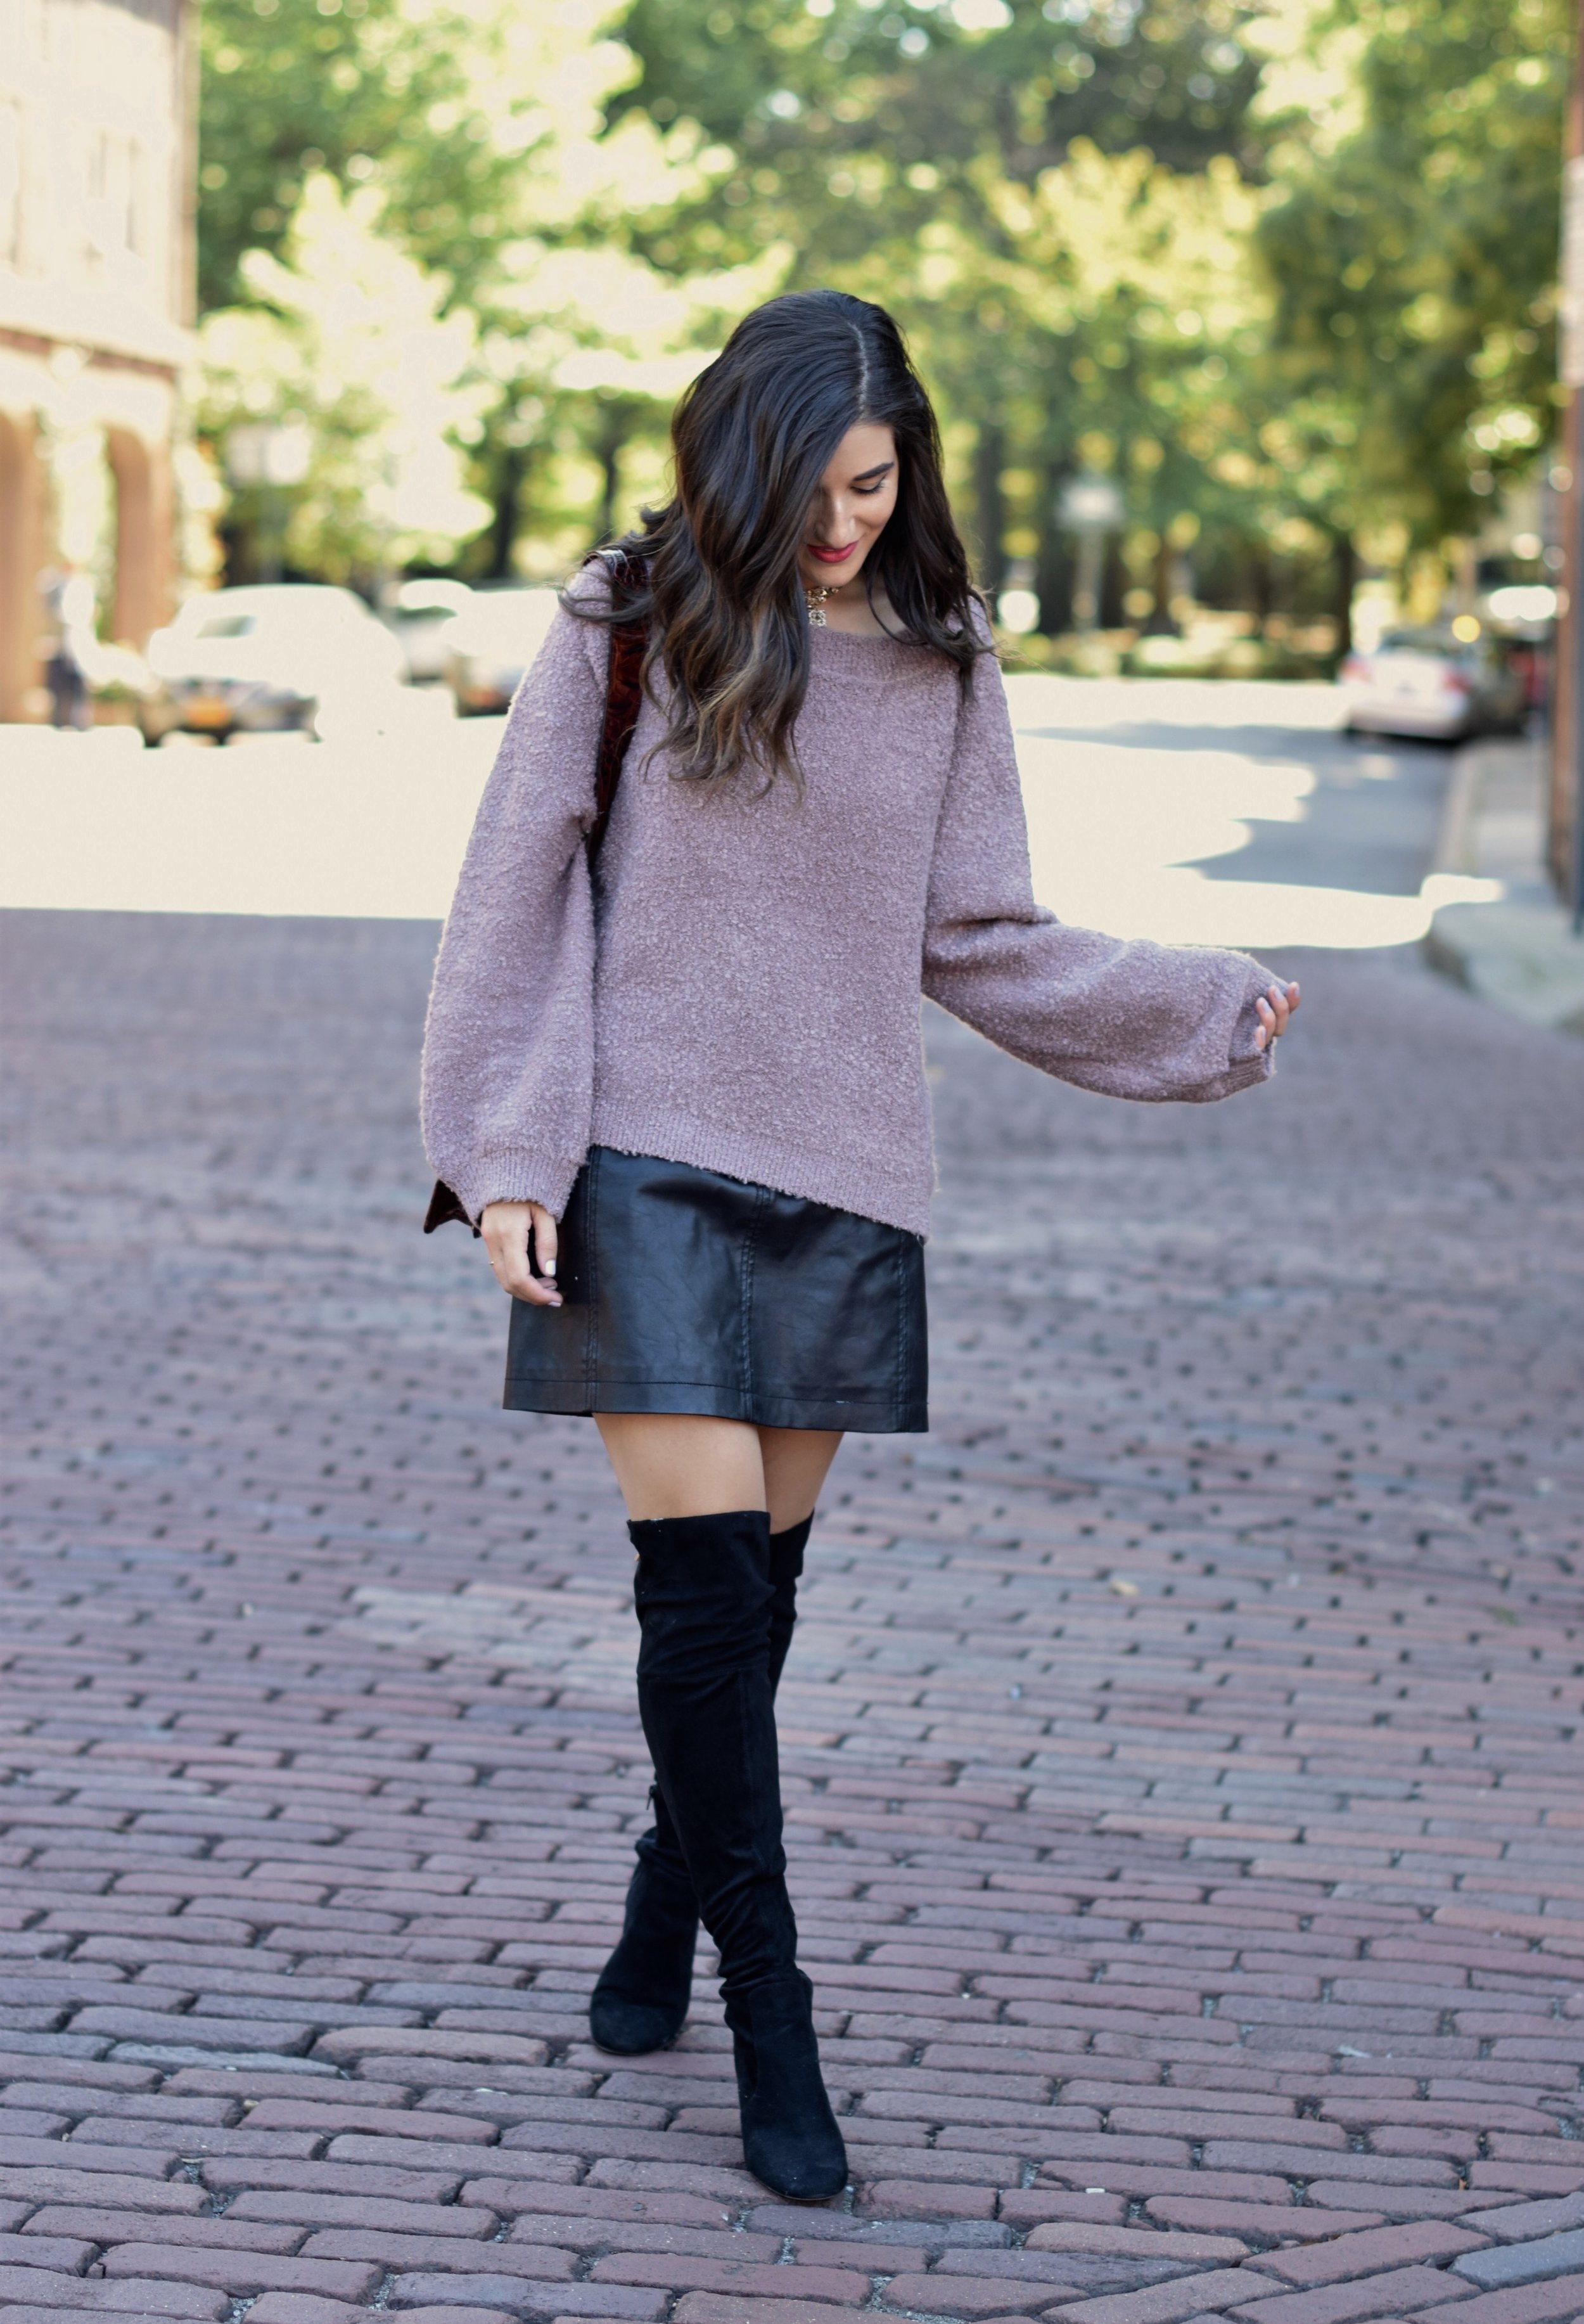 Purple Sweater Black Leather Skirt 8 Tips On Switching Your Blog Name Esther Santer Fashion Blog NYC Street Style Blogger Outfit OOTD Trendy Sunglasses Brahmin Bag Kendra Scott Choker Necklace Girl Women Urban Outfitters Winter Look Sale  Shopping.jpg